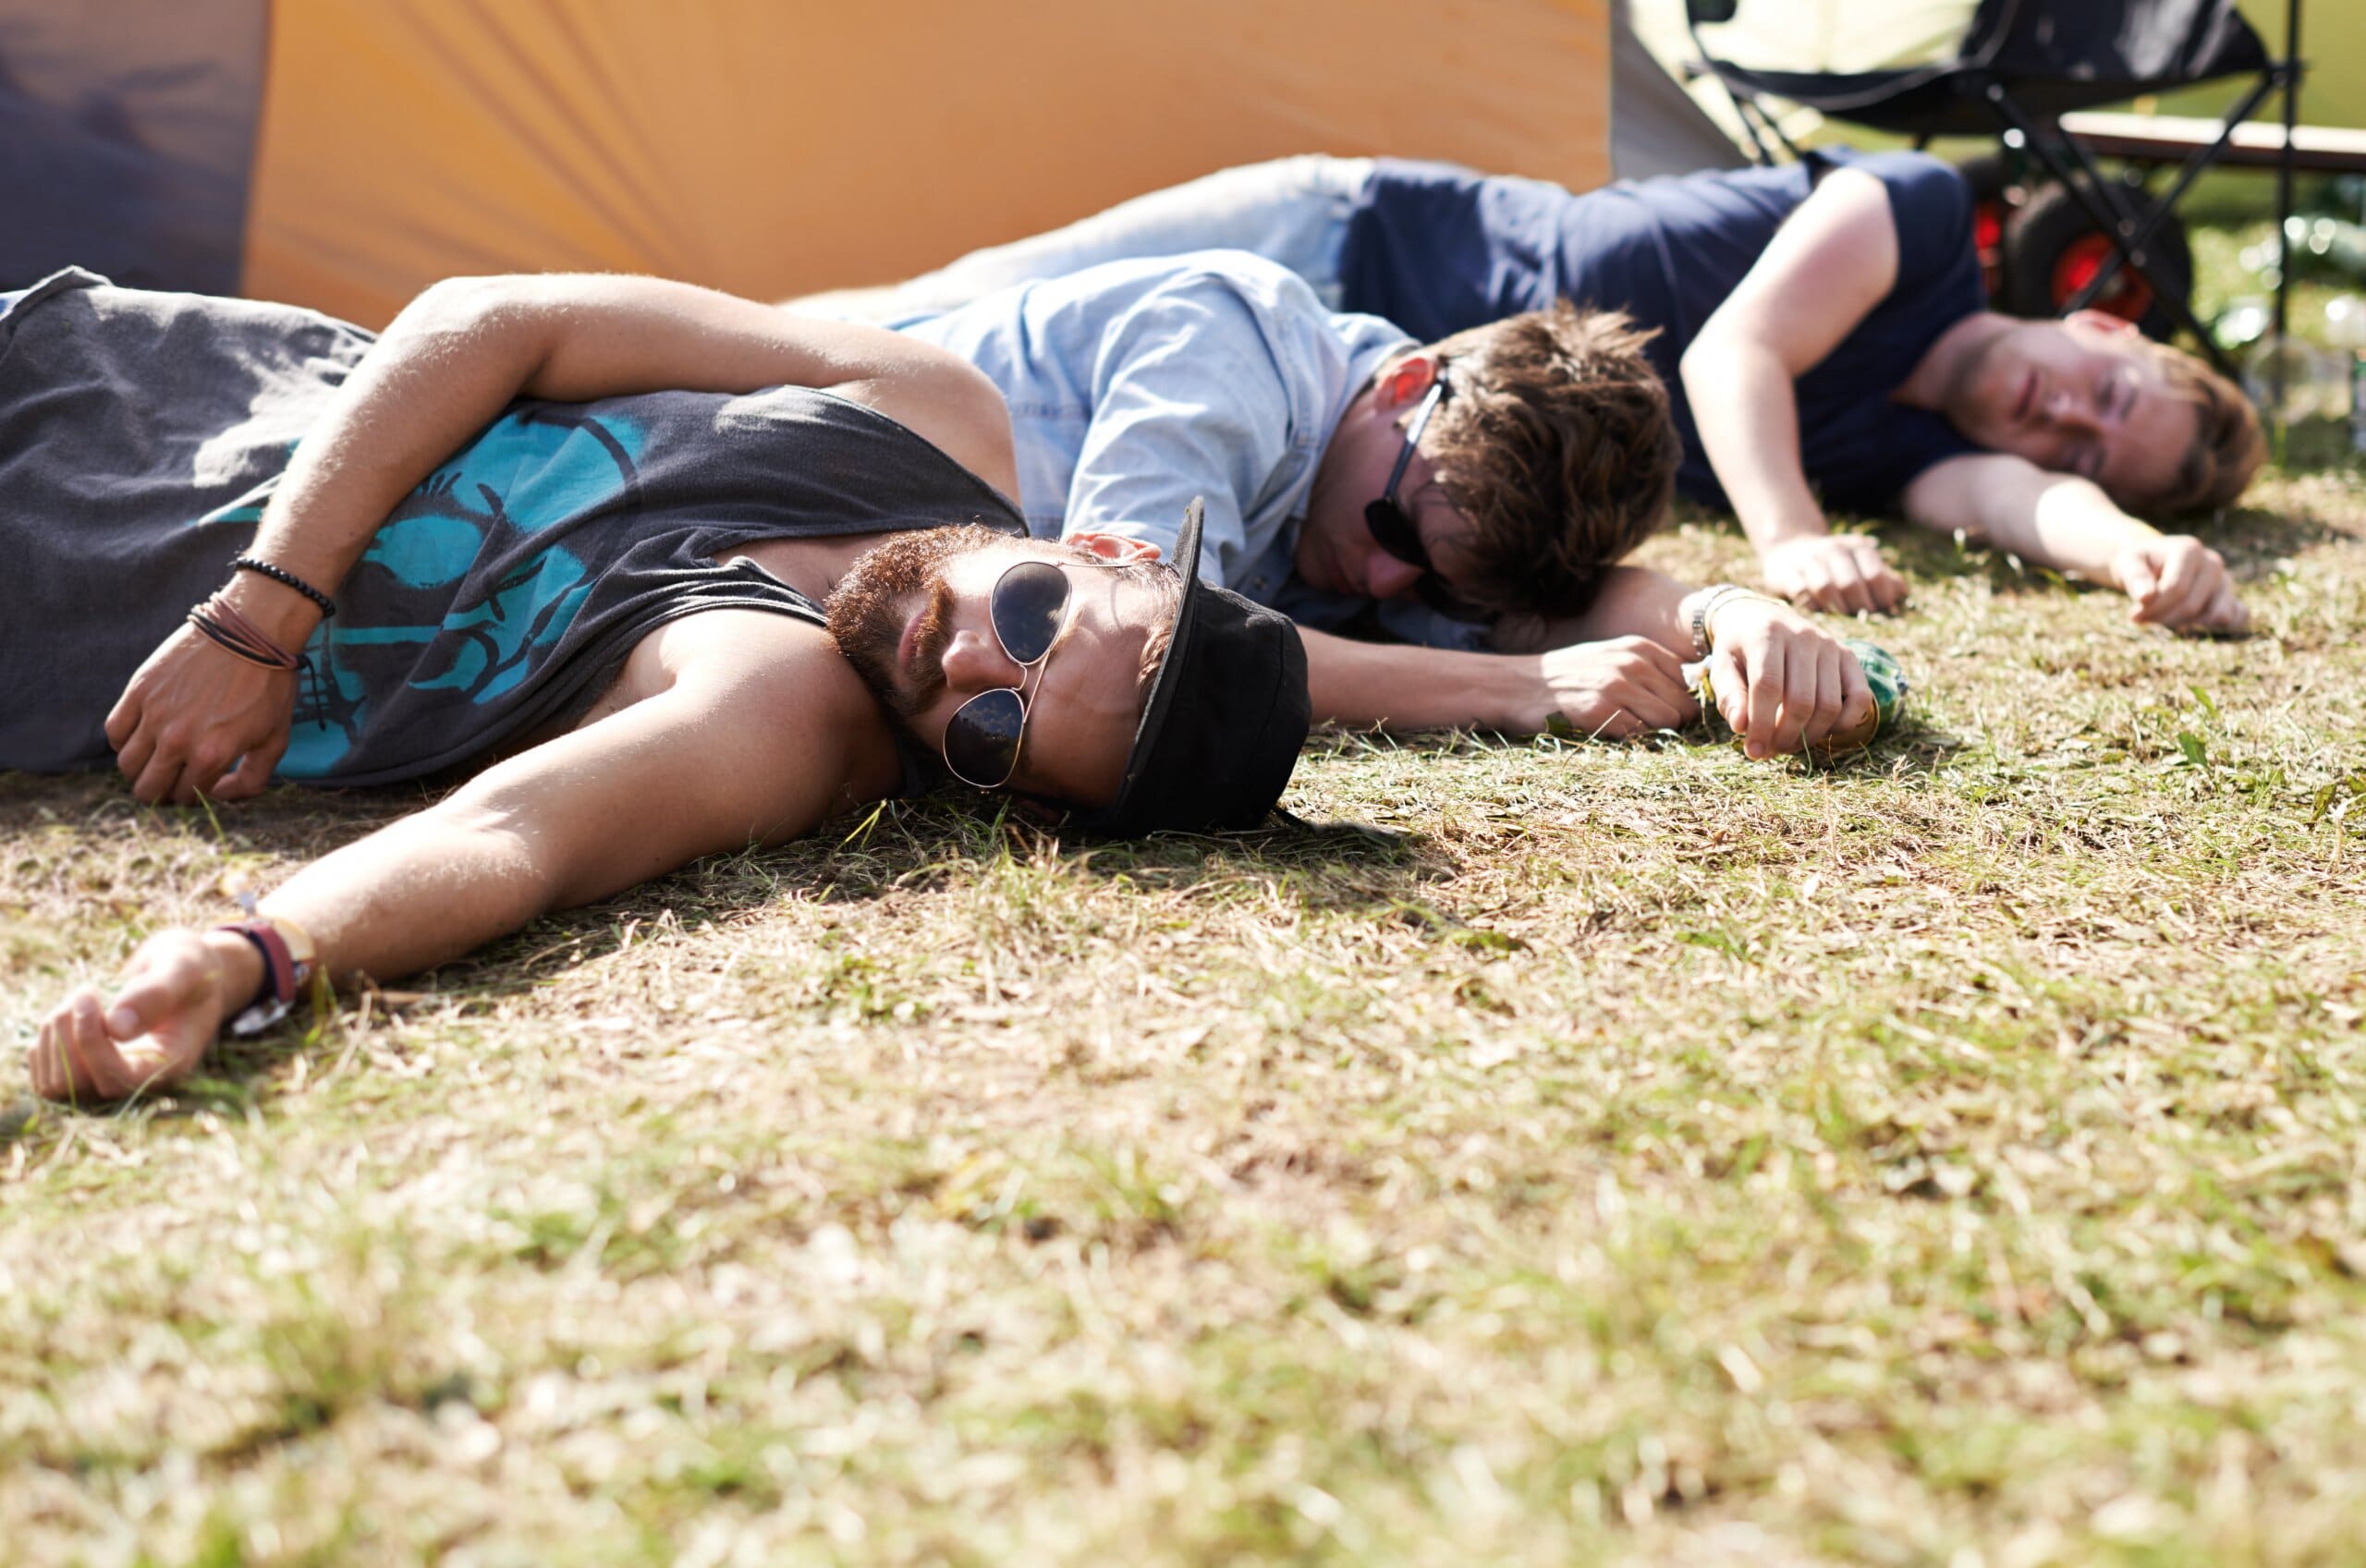 Three men laying down sleeping at a festival, hungover.